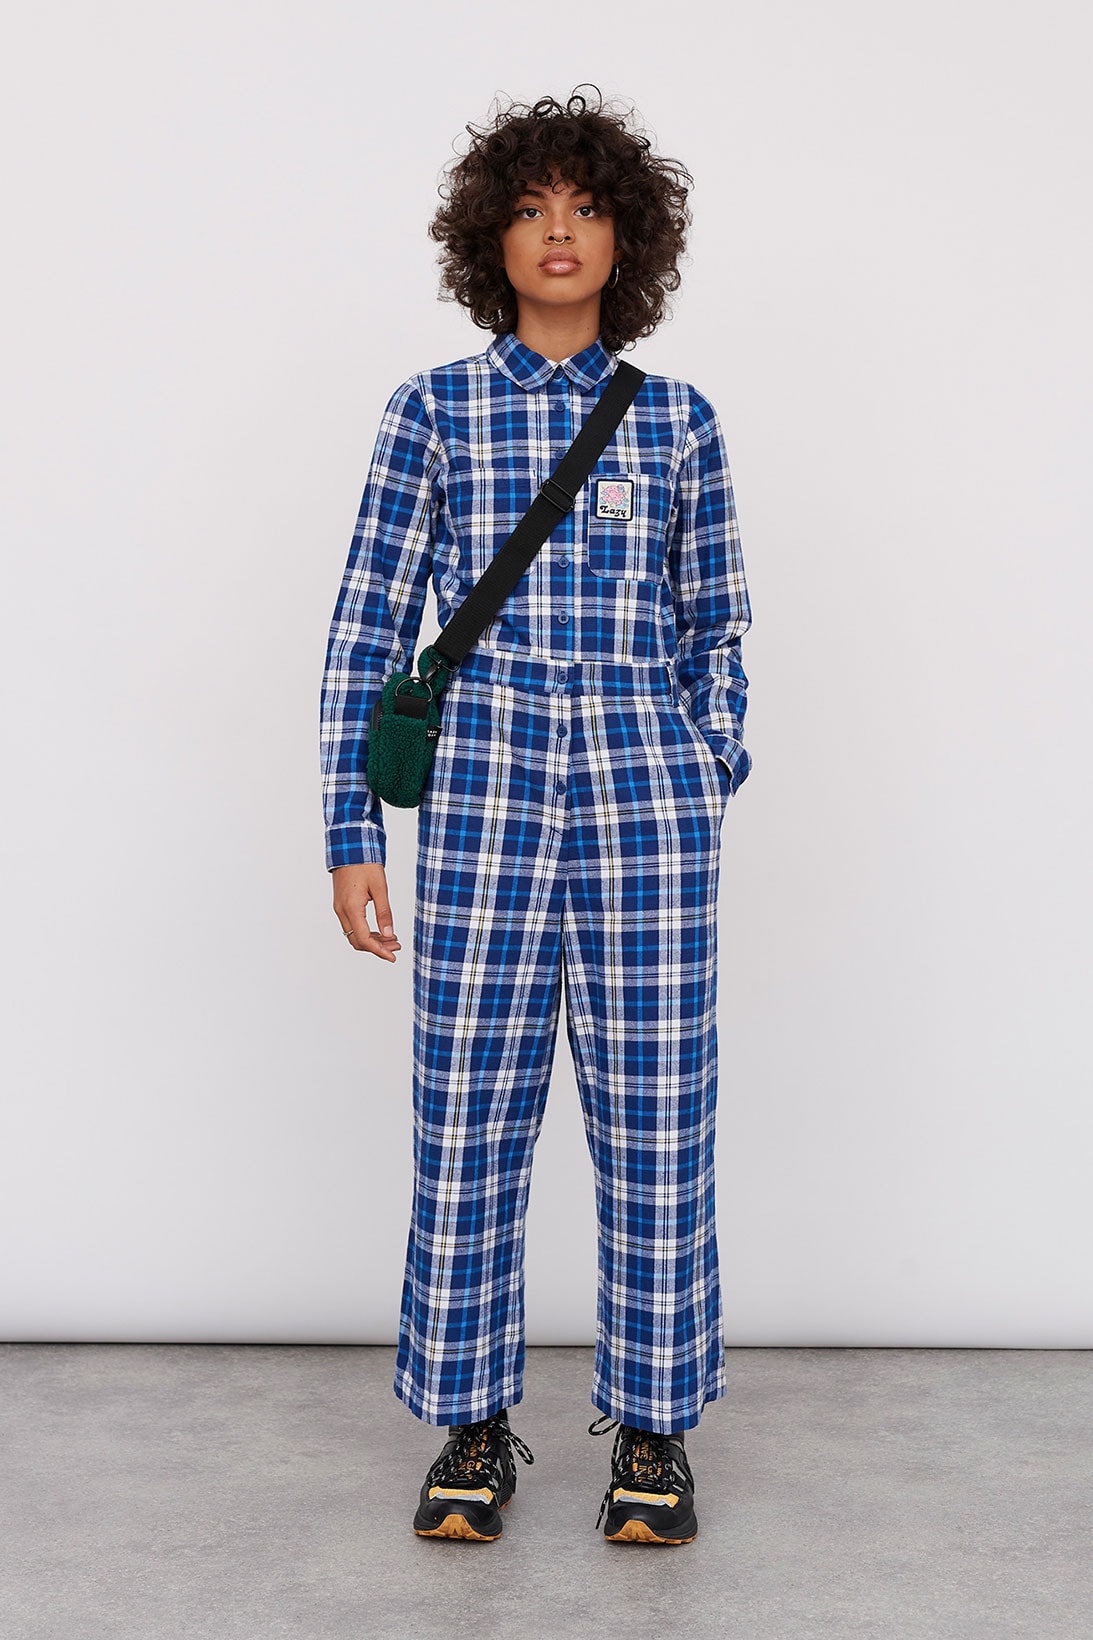 Lazy Oaf Take A Hike Outdoor Hiking Collection Lookbook Blue Check Plaid Jumpsuit